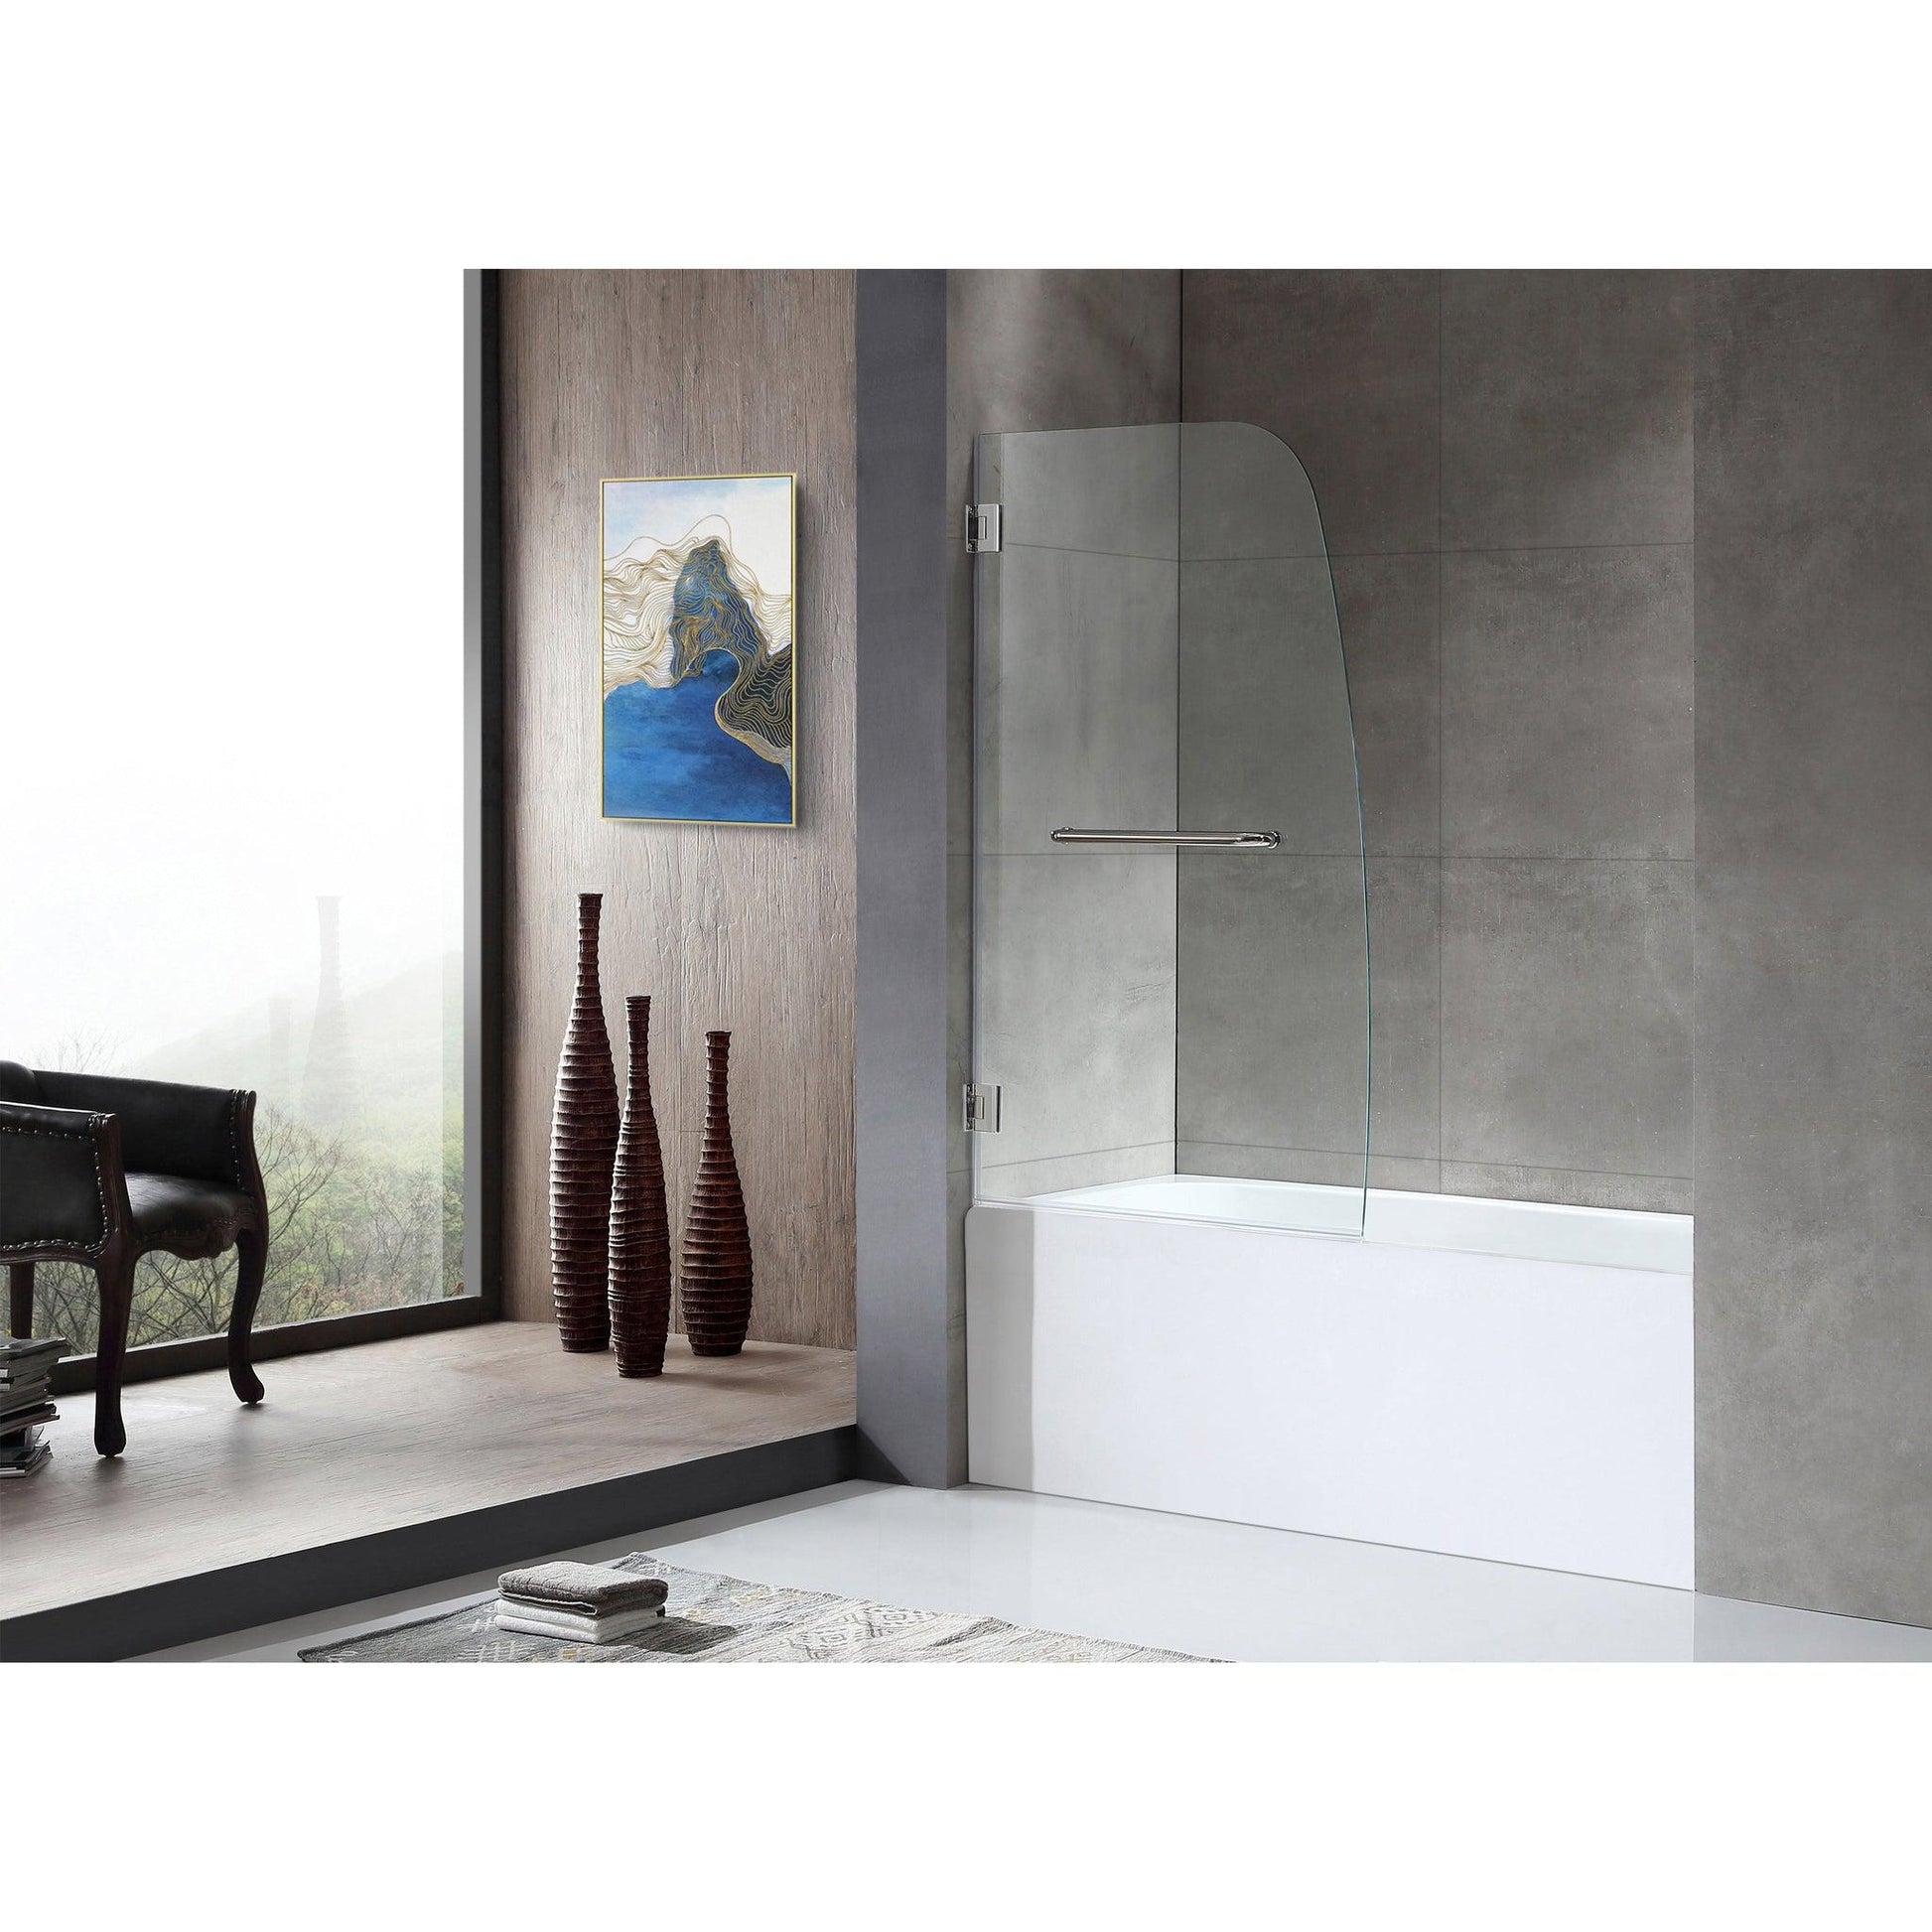 ANZZI Grand Series White "60 x 30" Alcove Left Drain Rectangular Bathtub With Built-In Flange and Frameless Polished Chrome Hinged Door